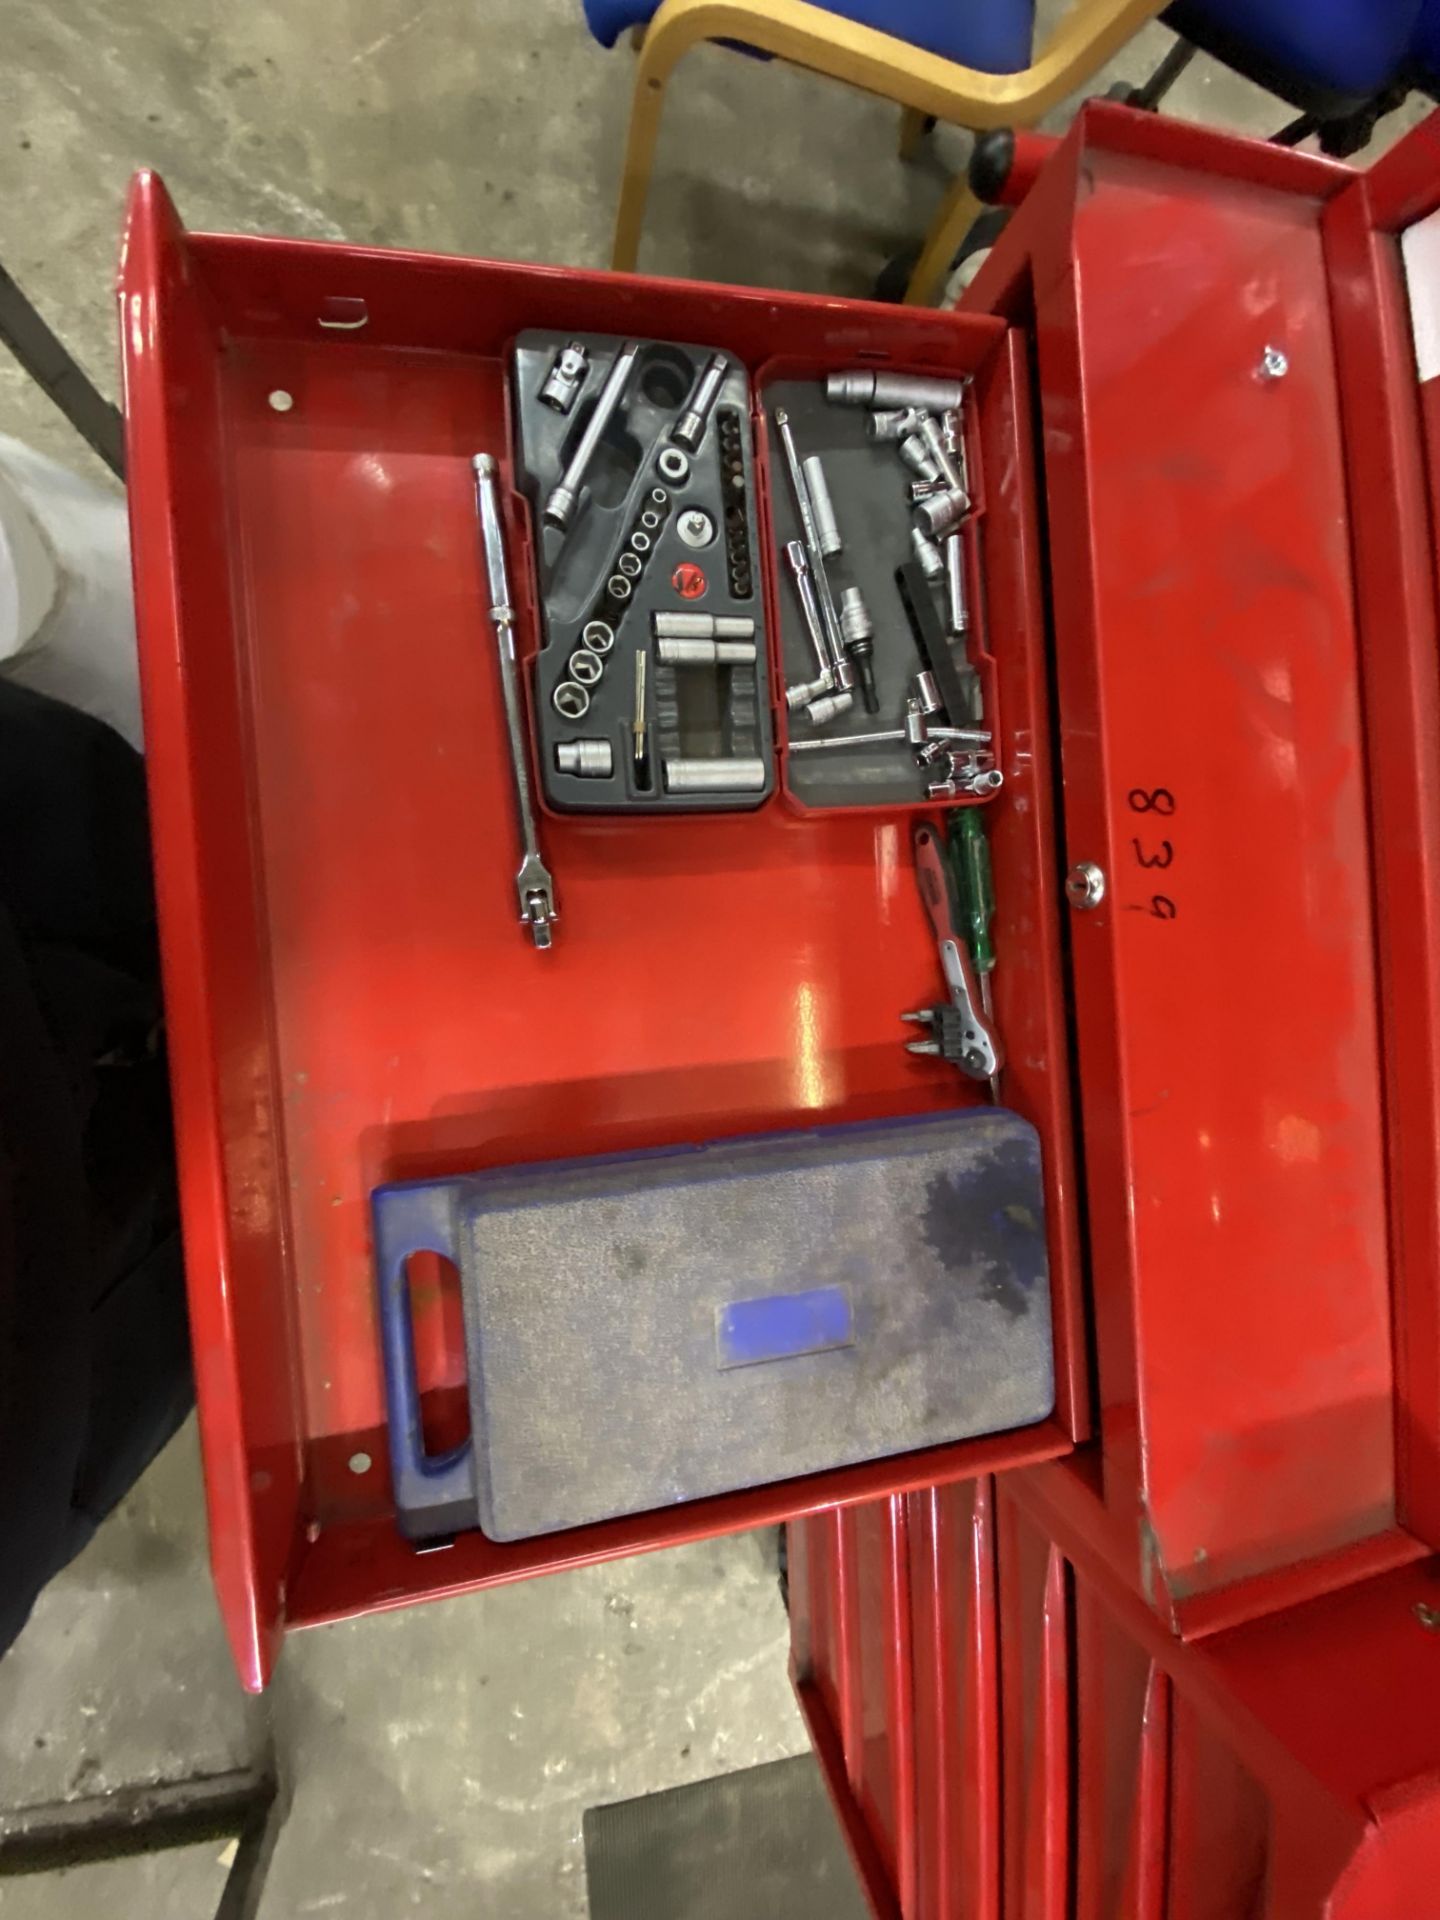 (SRL) Teng Tools Multi-Drawer Tool Cabinets, in one tower, with residual tool contents (located - Image 7 of 11